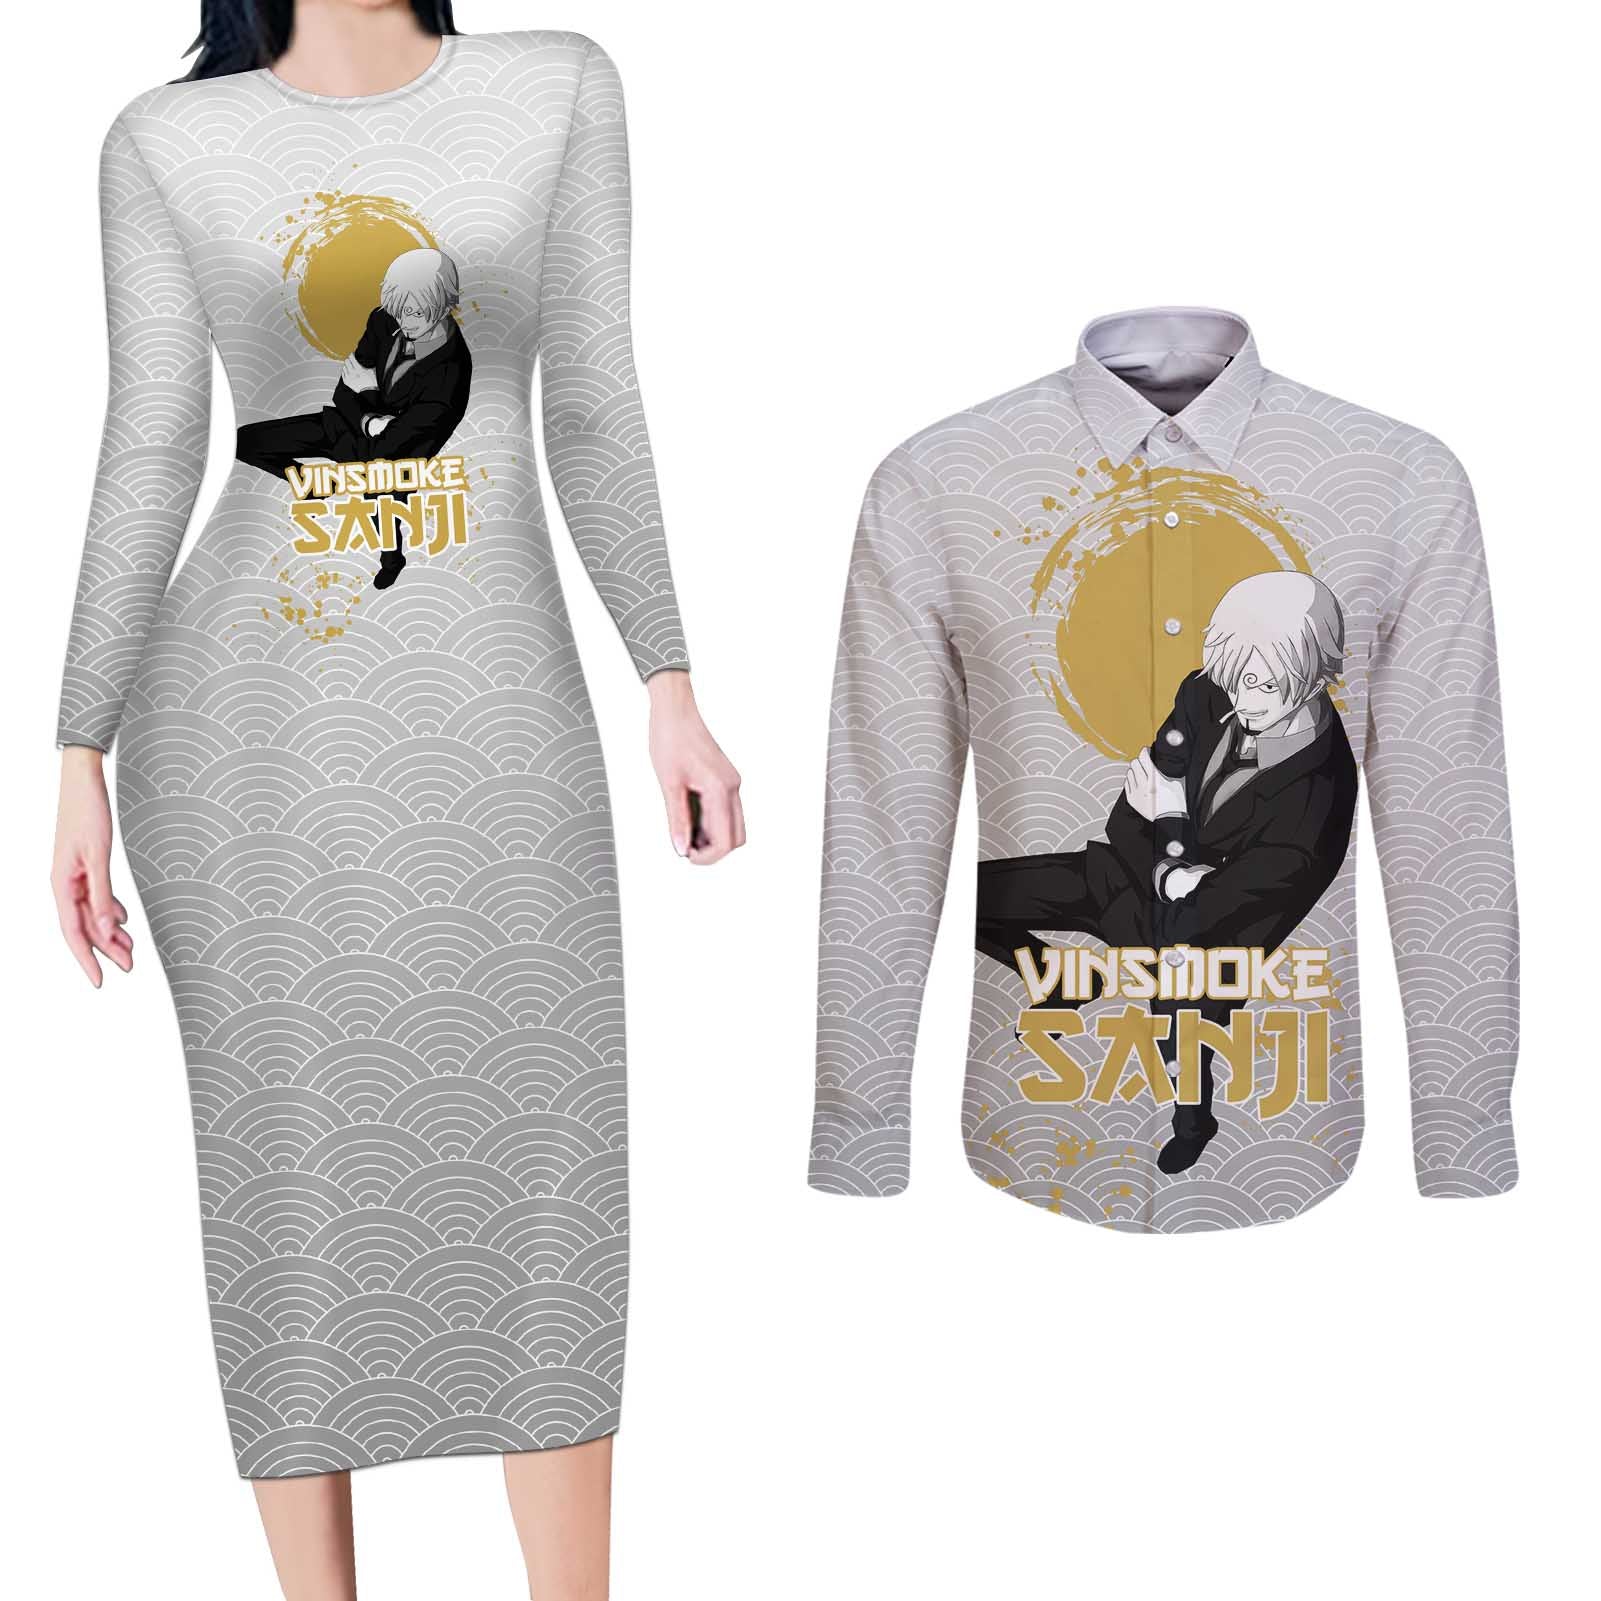 Sanji - One Piece Couples Matching Long Sleeve Bodycon Dress and Long Sleeve Button Shirt Anime Style